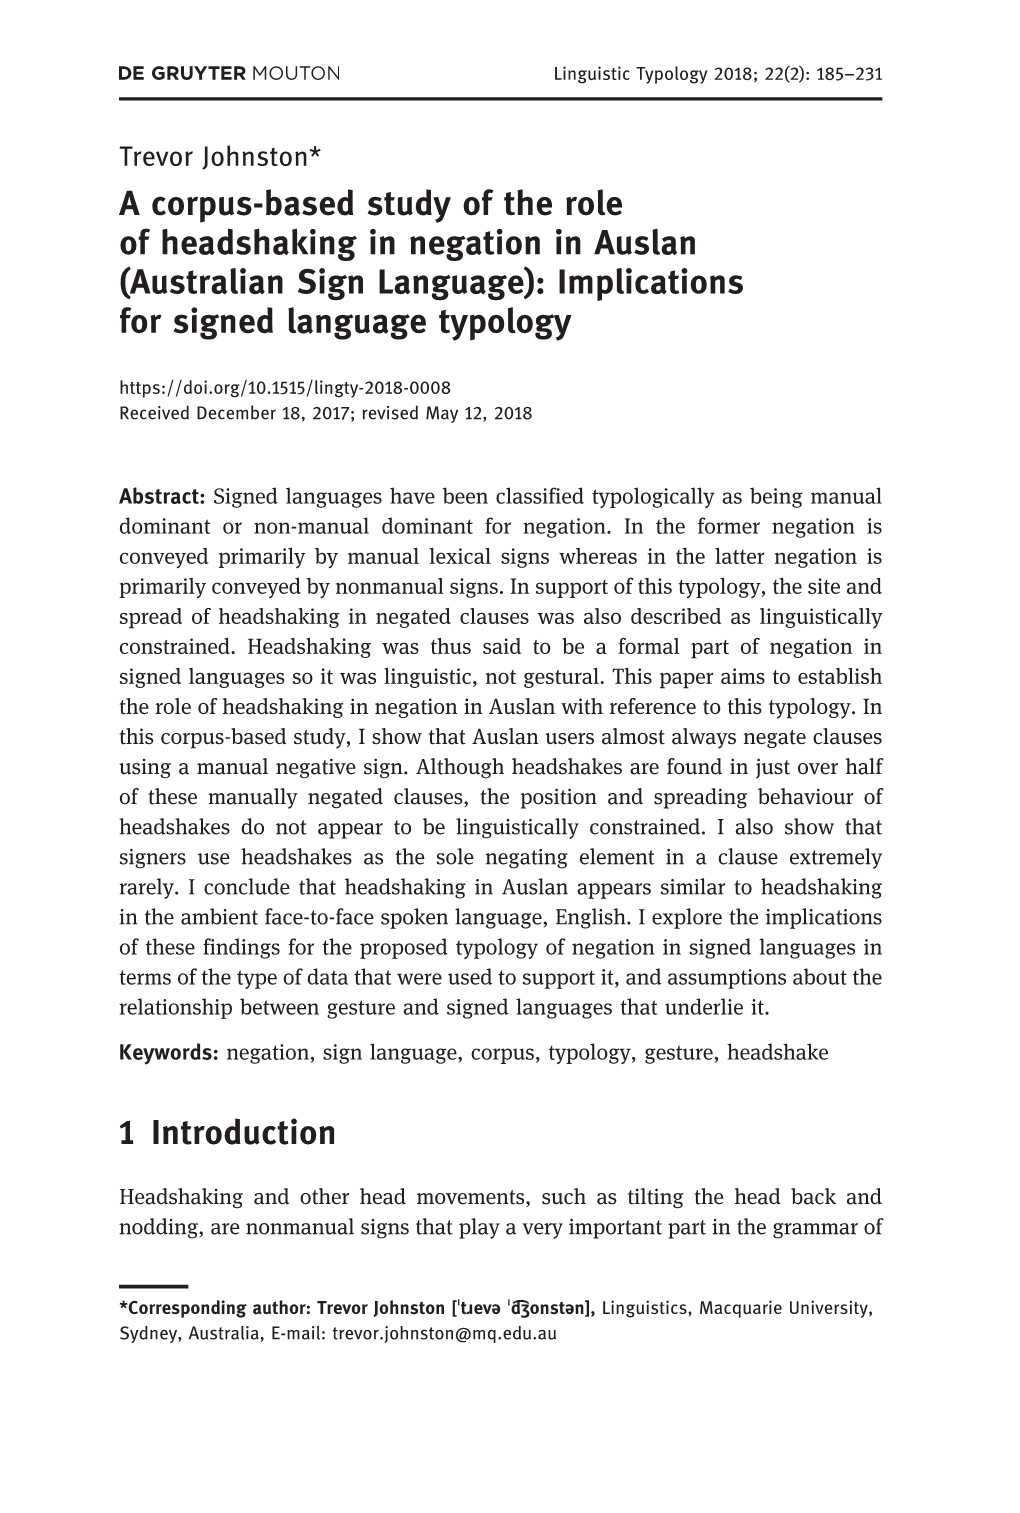 A Corpus-Based Study of the Role of Headshaking in Negation in Auslan